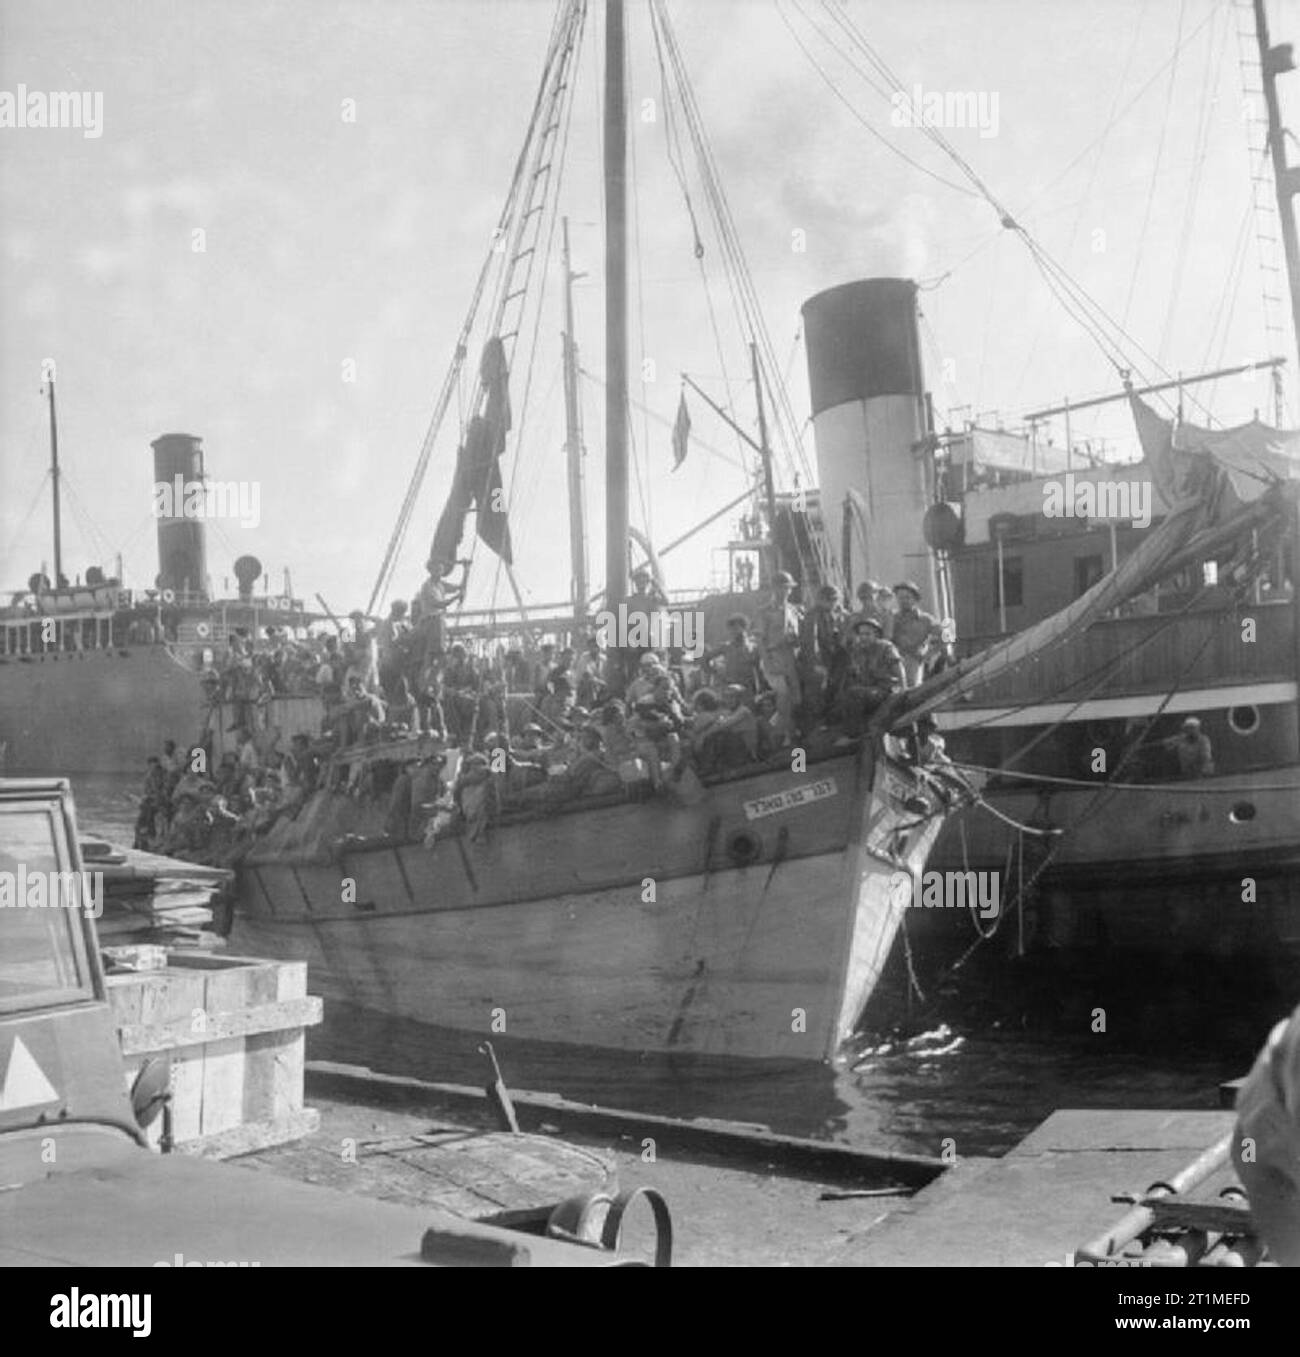 The British Mandate in Palestine 1917-1948 Illegal immigrants arriving into Palestine: British Army personnel on board the sailing vessel YAGOUR, loaded with illegal Jewish immigrants at Haifa docks. The illegal immigrants were taken to a camp in Cyprus while a decision was made about their future. Stock Photo